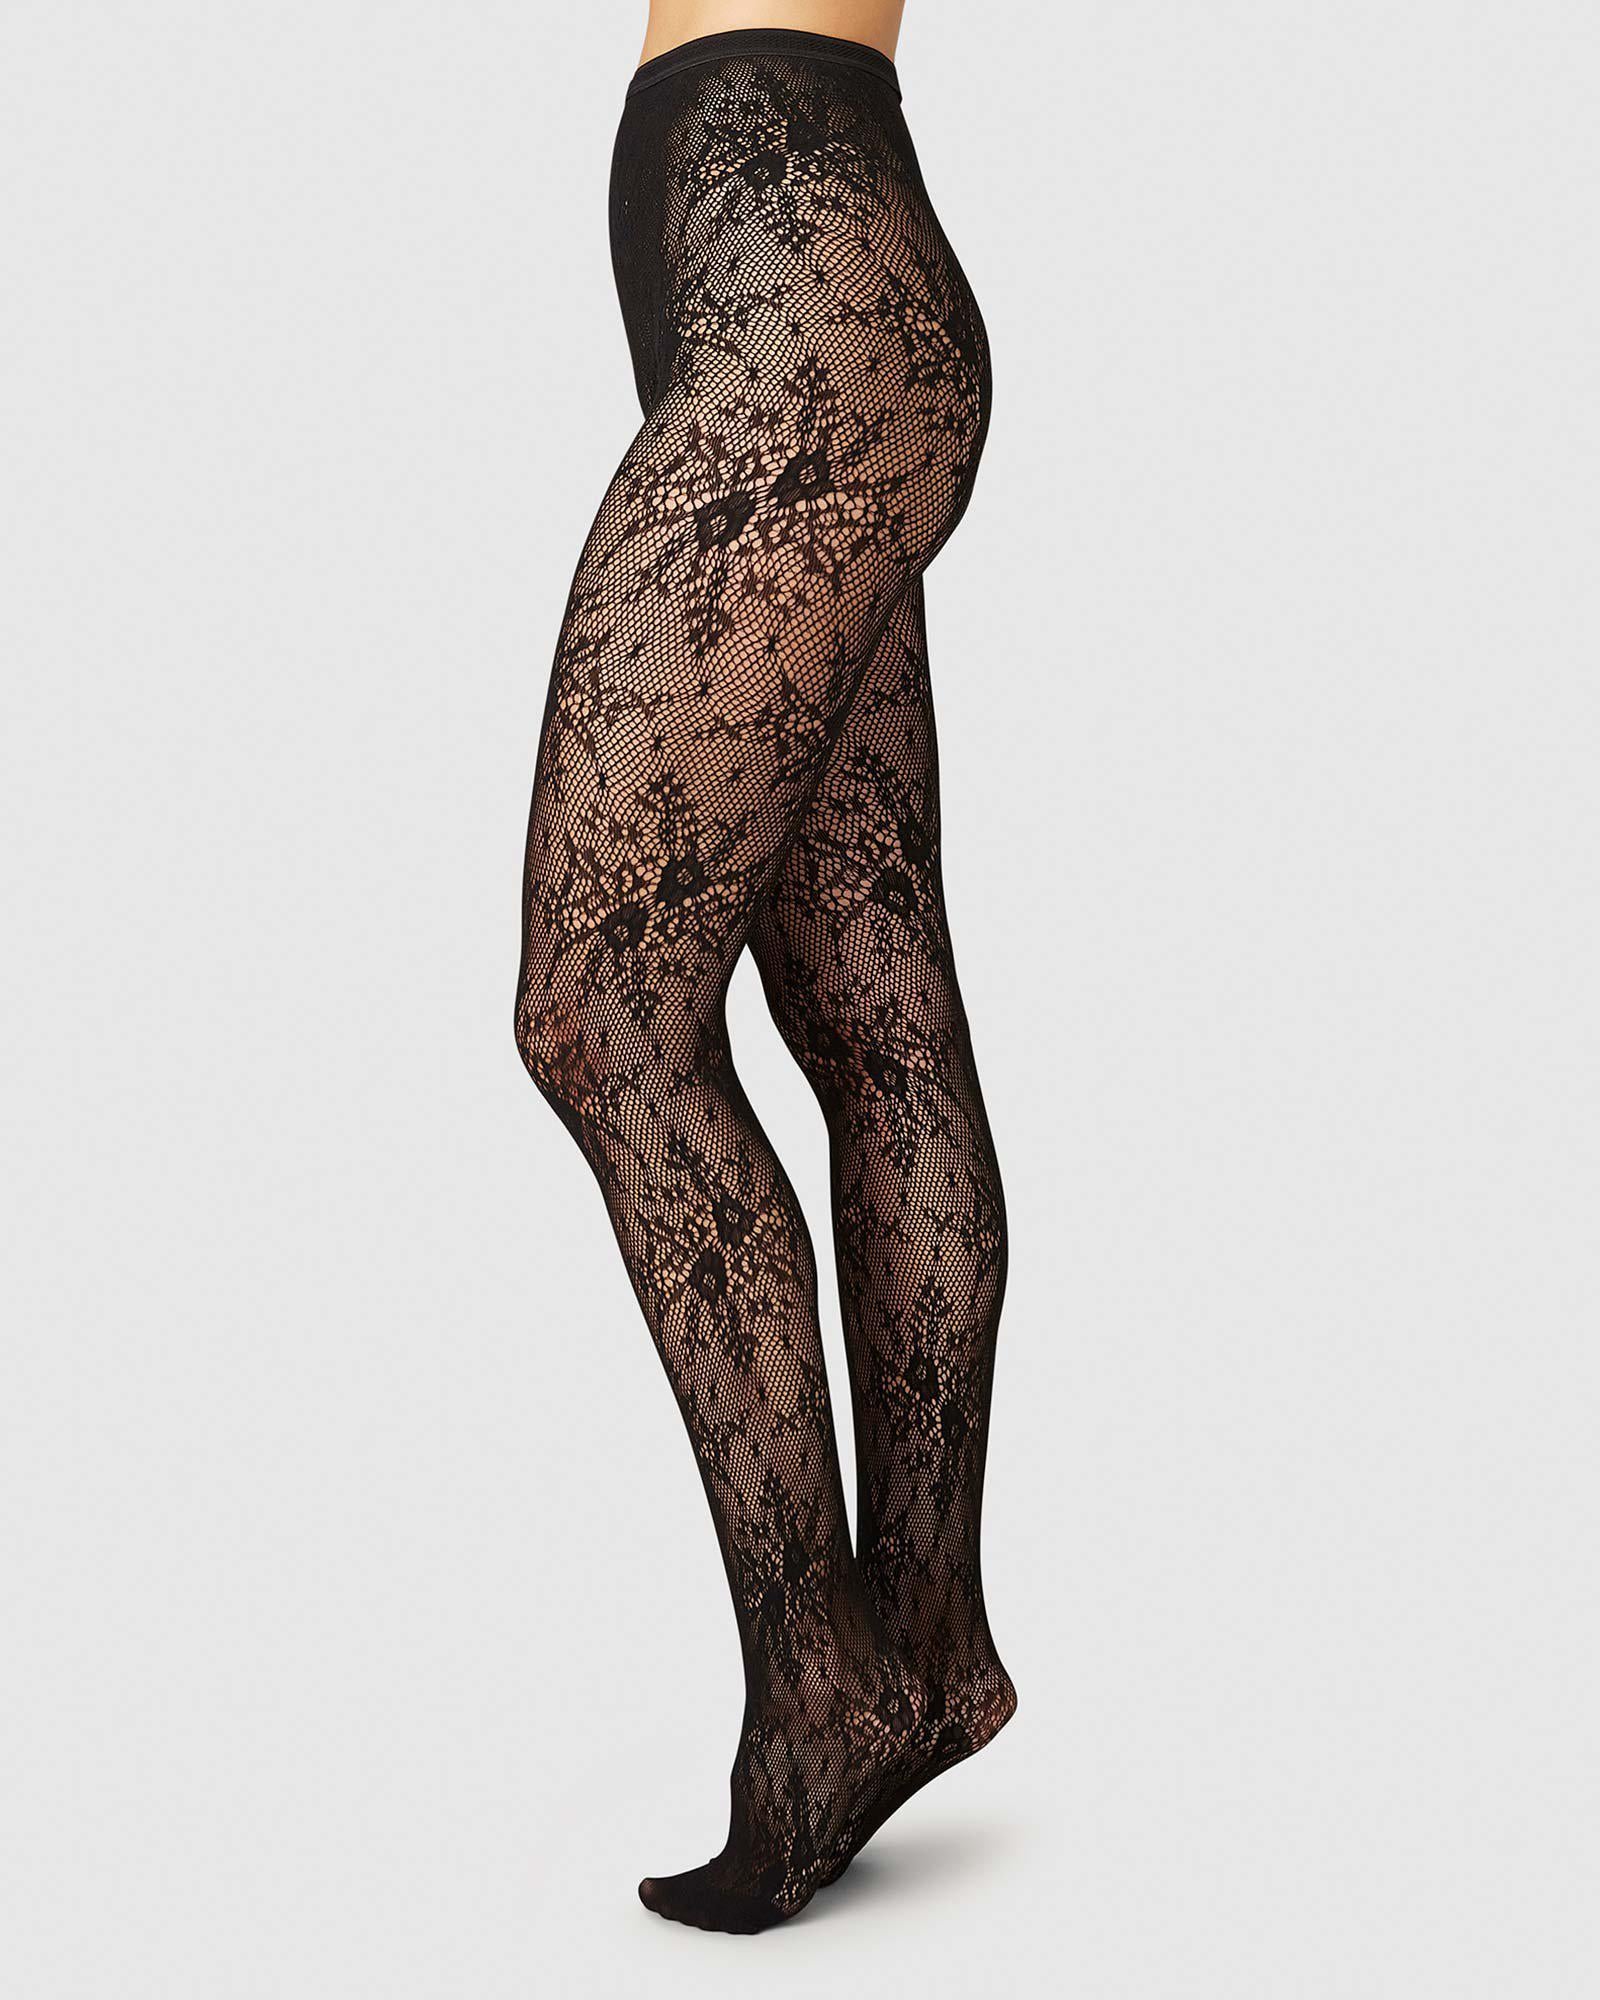 Rosa Lace Tights Black | Buy now - Swedish Stockings